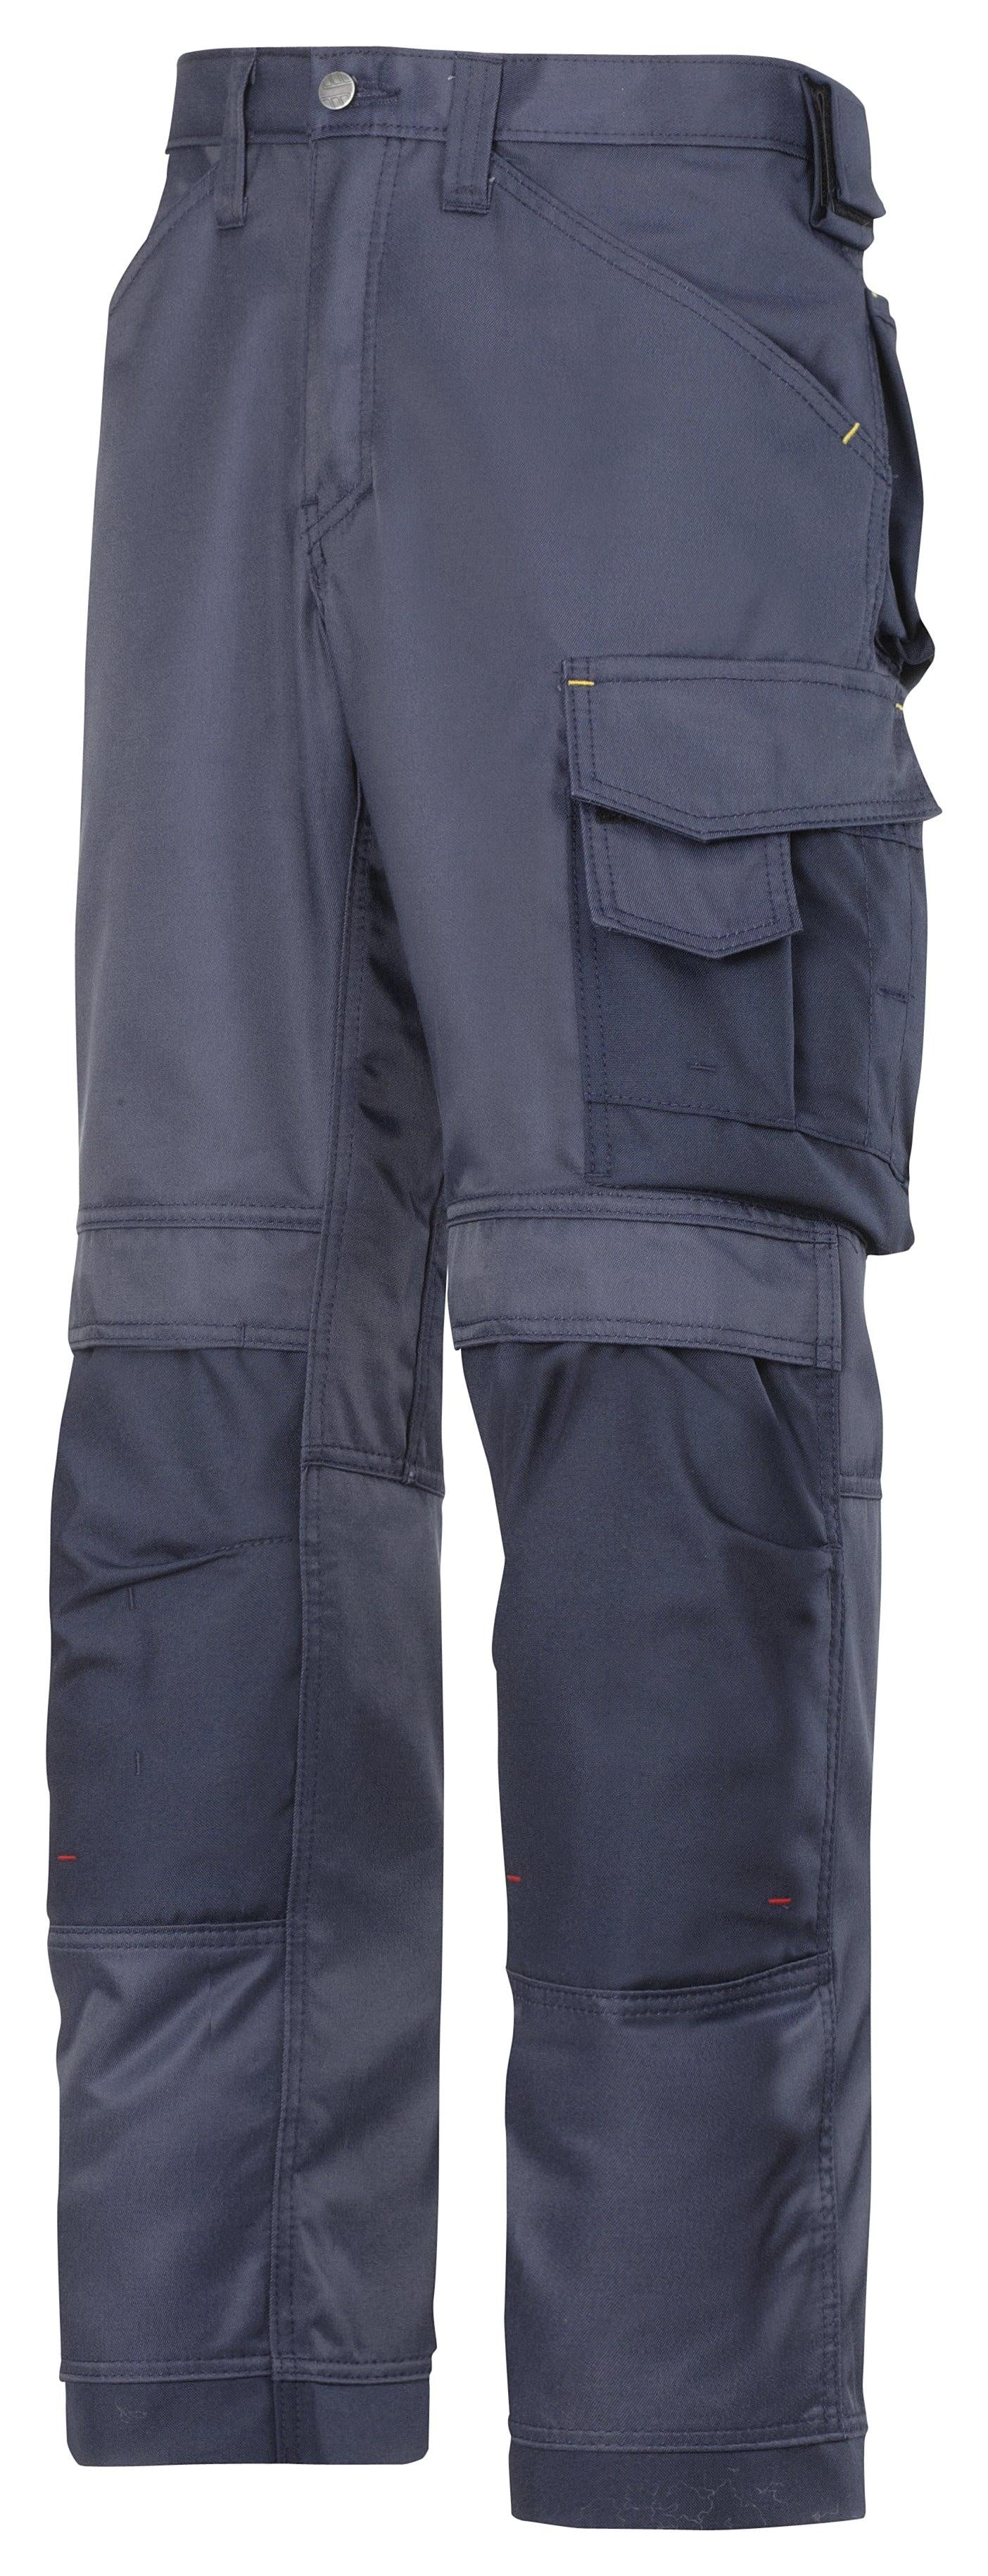 DuraTwill craftsmen trousers, non holsters SI006 - Trustsport